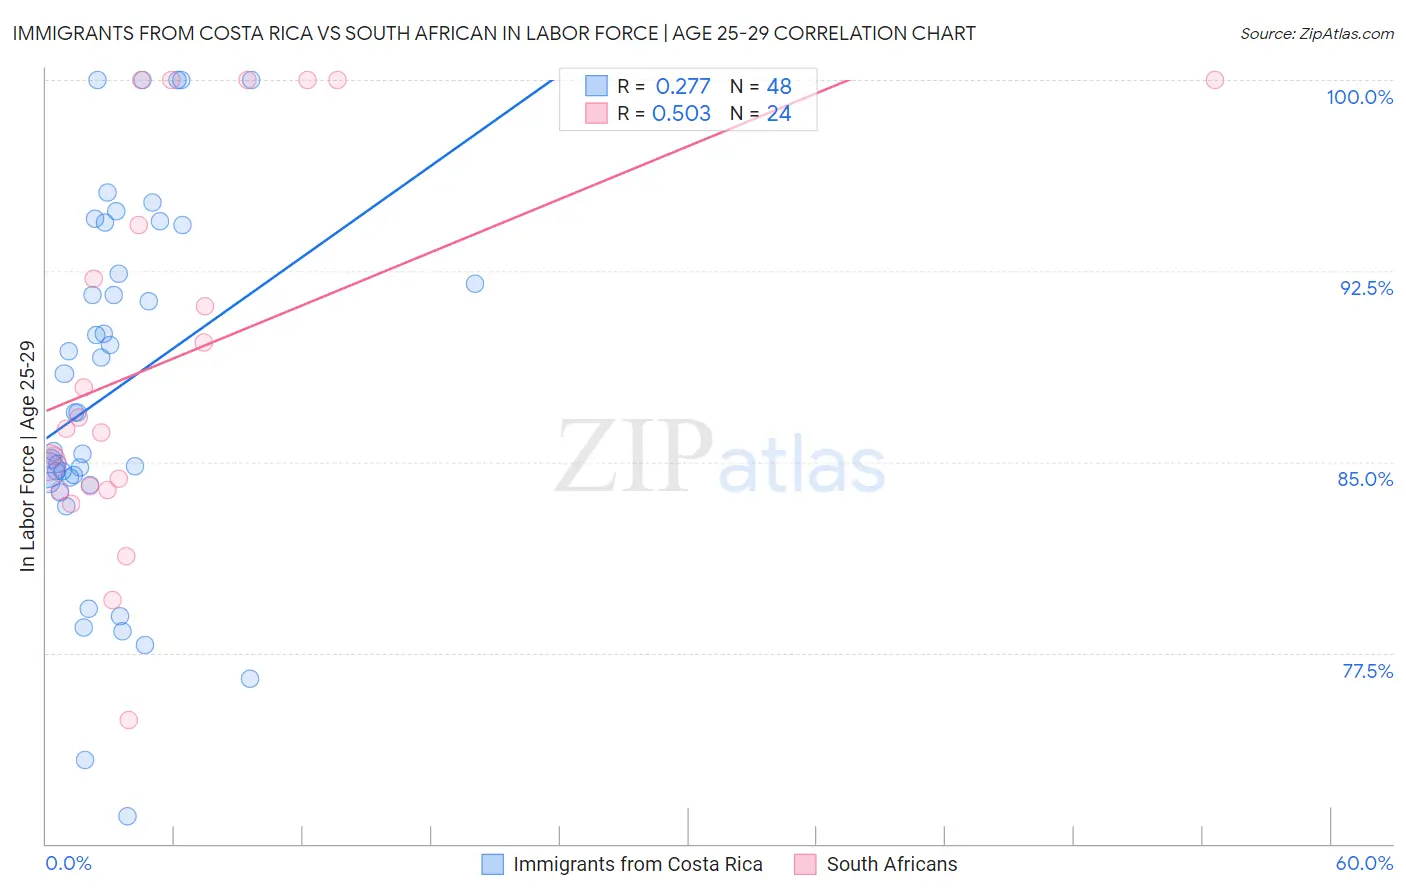 Immigrants from Costa Rica vs South African In Labor Force | Age 25-29